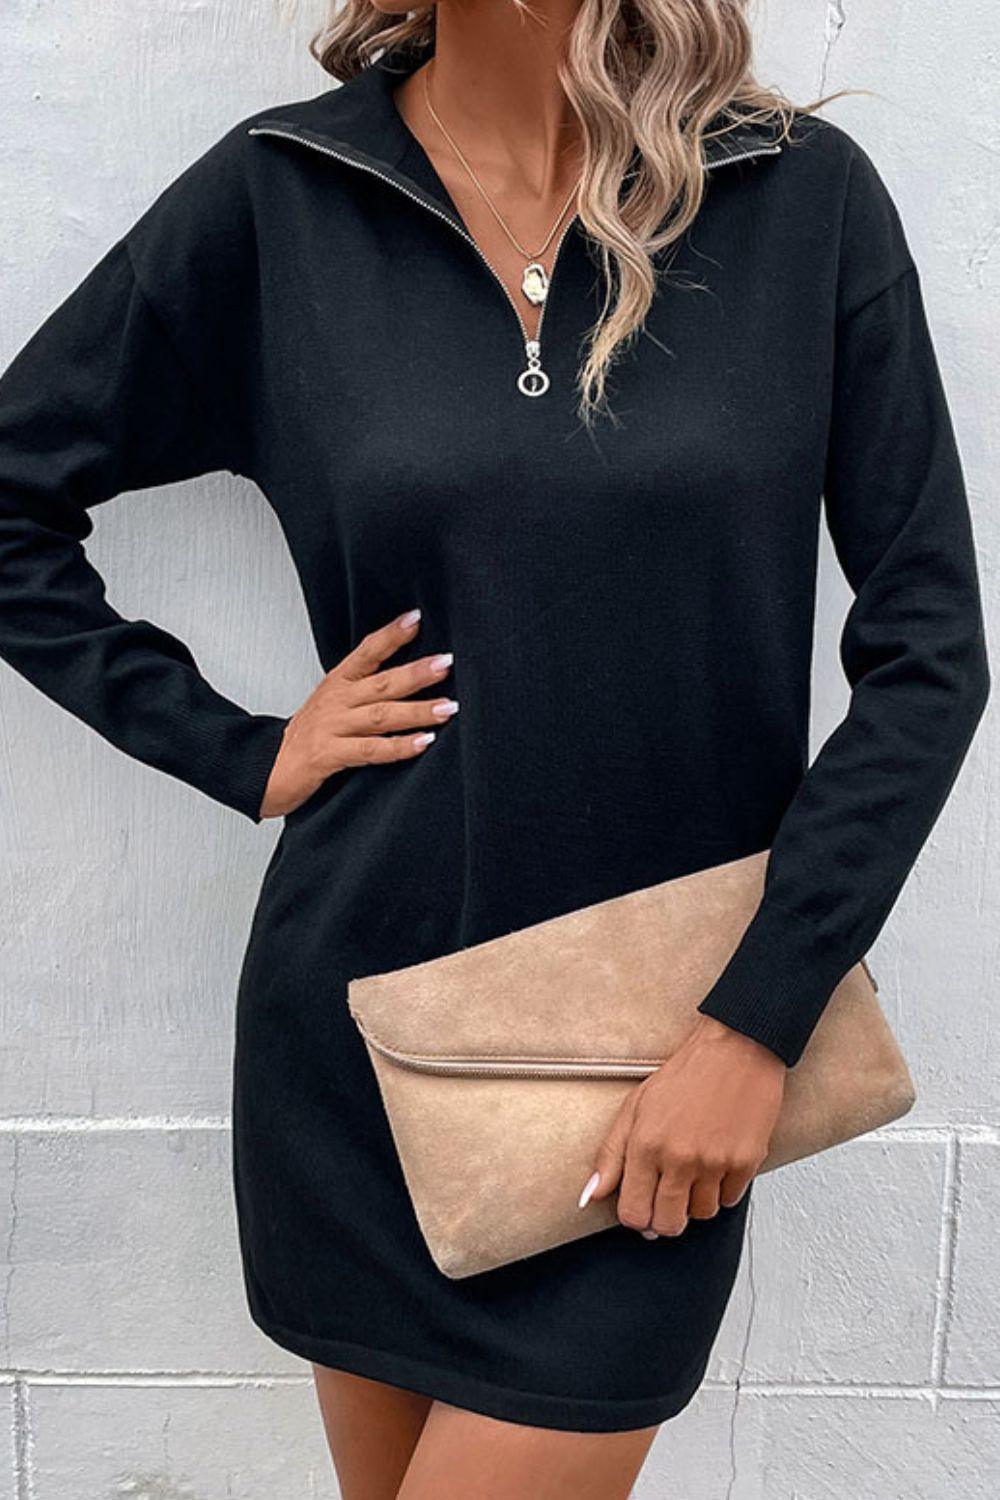 Unbothered By the Cold Knit Black Mini Sweater Dress - MXSTUDIO.COM